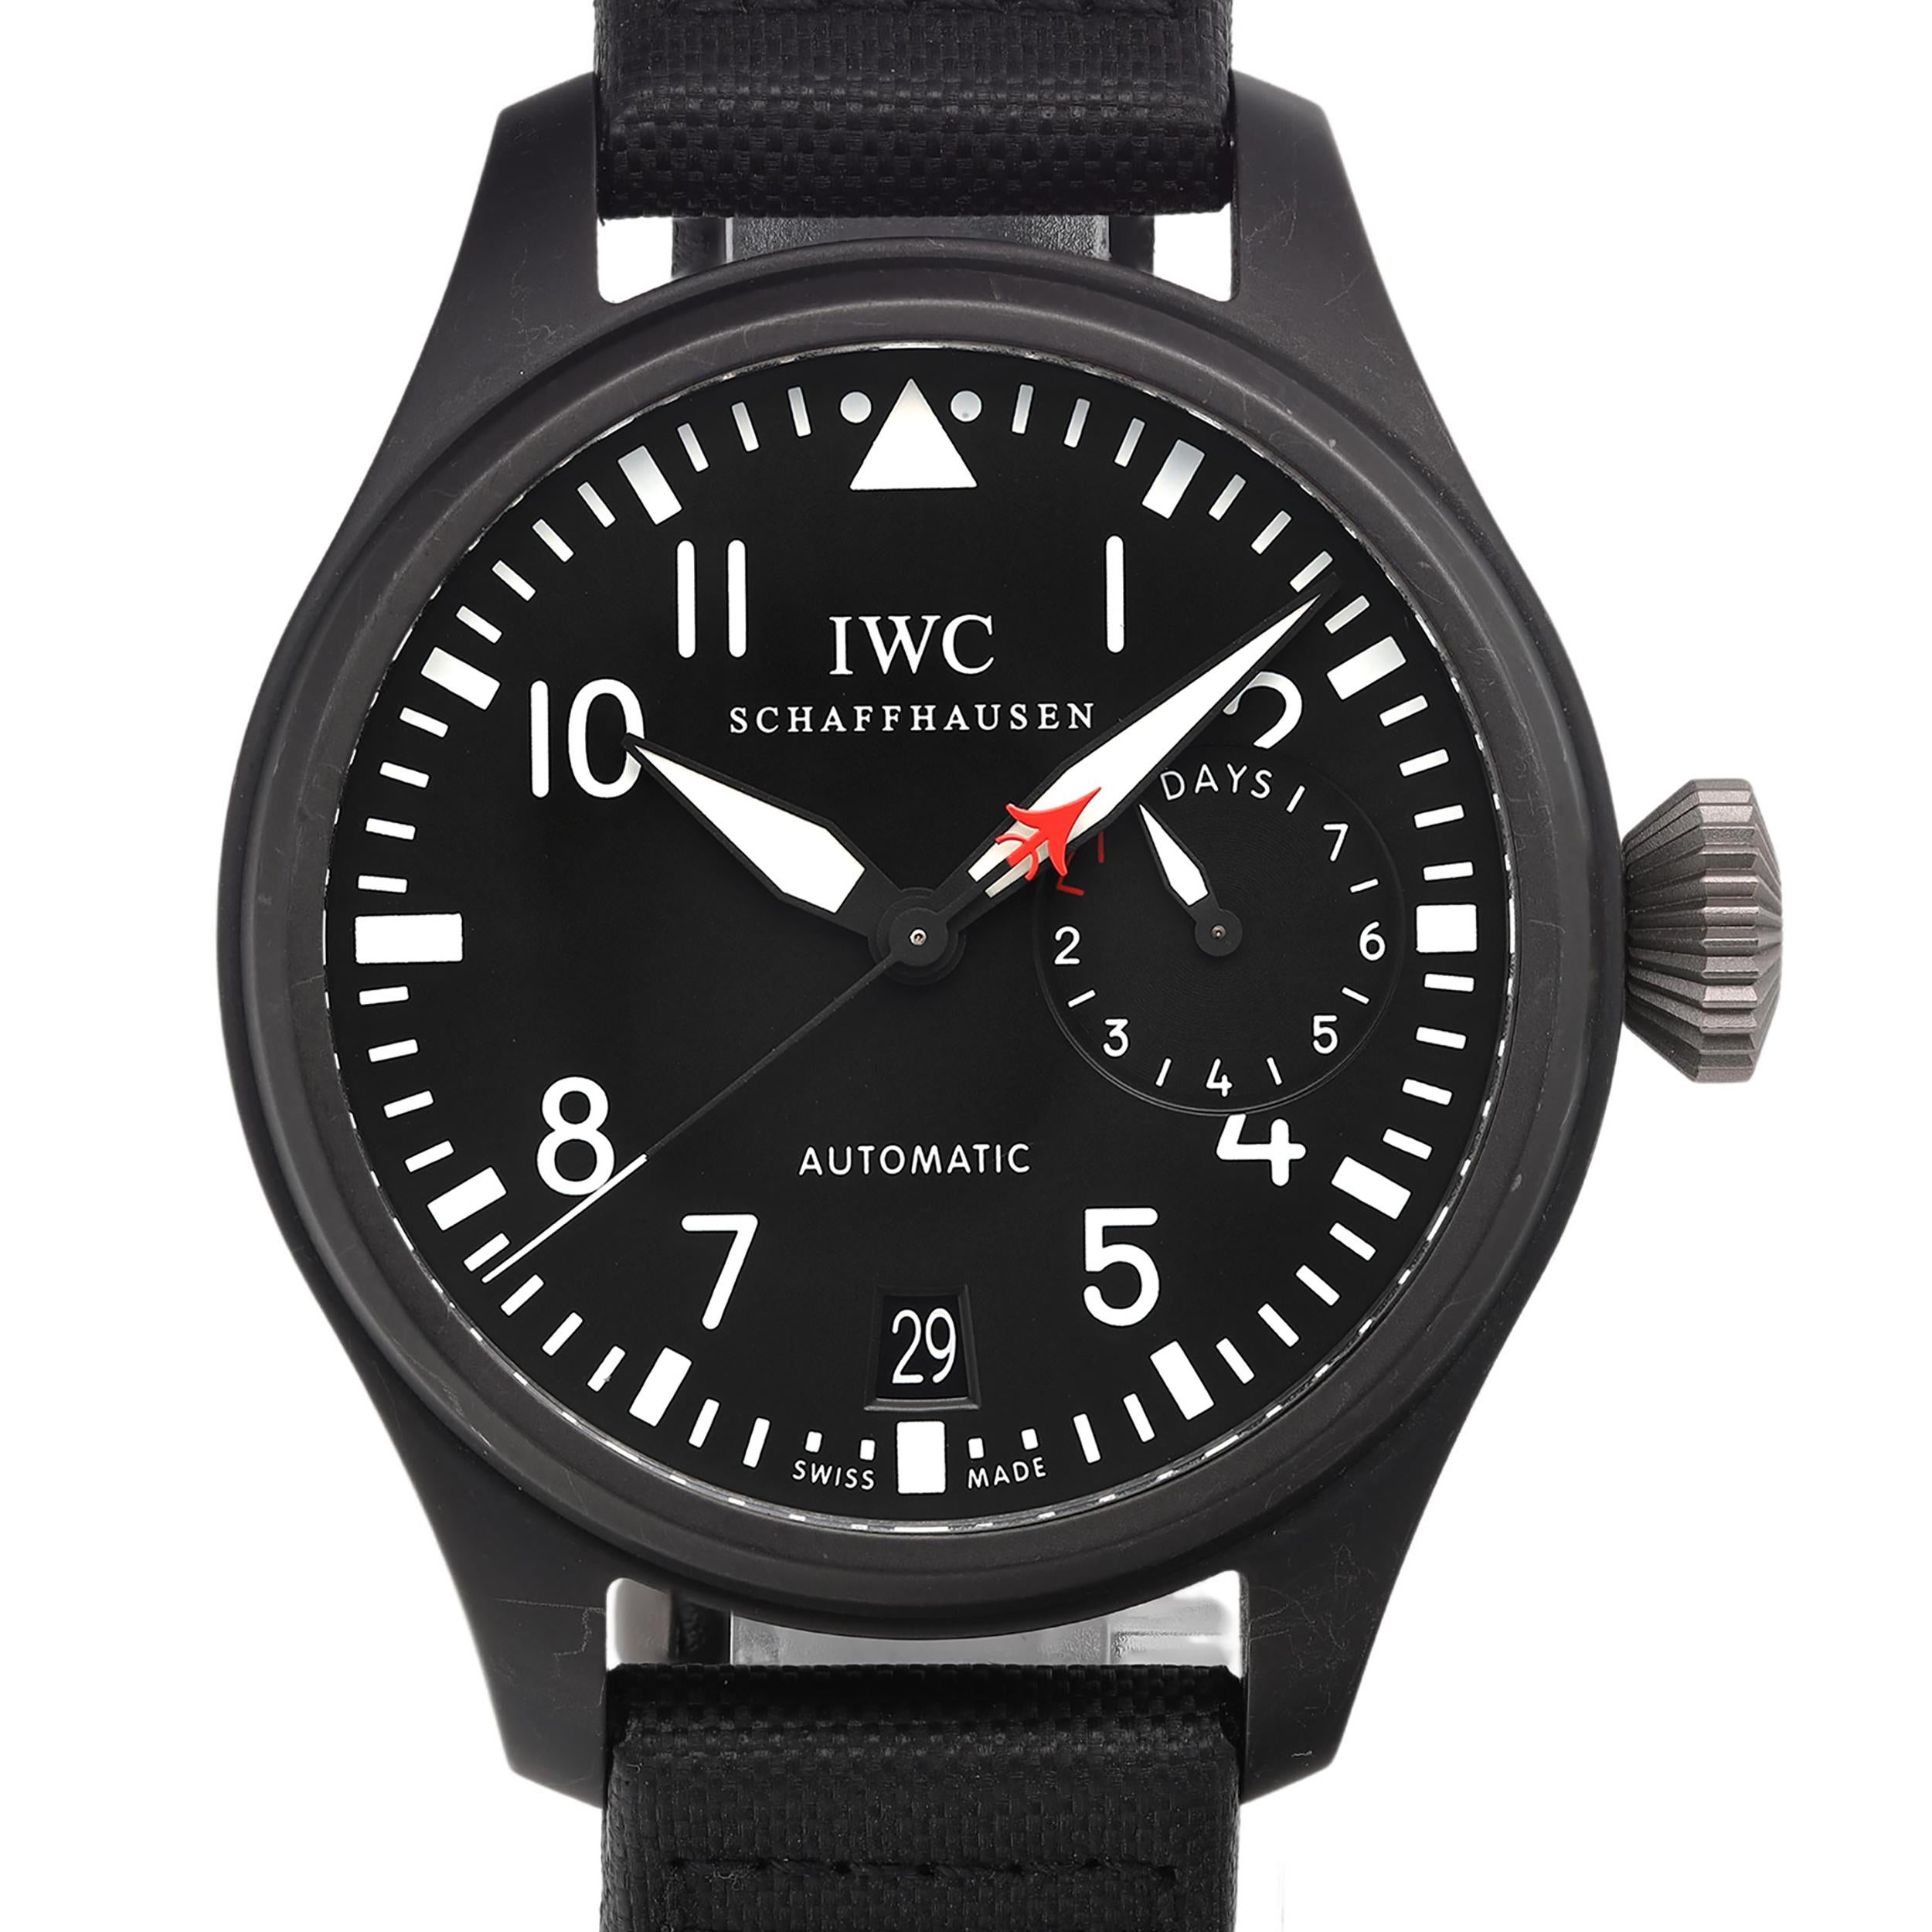 Pre-owned. Good condition. Minor scratches and scuffs on the case and bezel. Comes with Card. Original box and Manuals are Not included.  Comes with a presentation box and an authenticity card. Covered by a 2-year Sellers warranty. 

Brand: IWC 